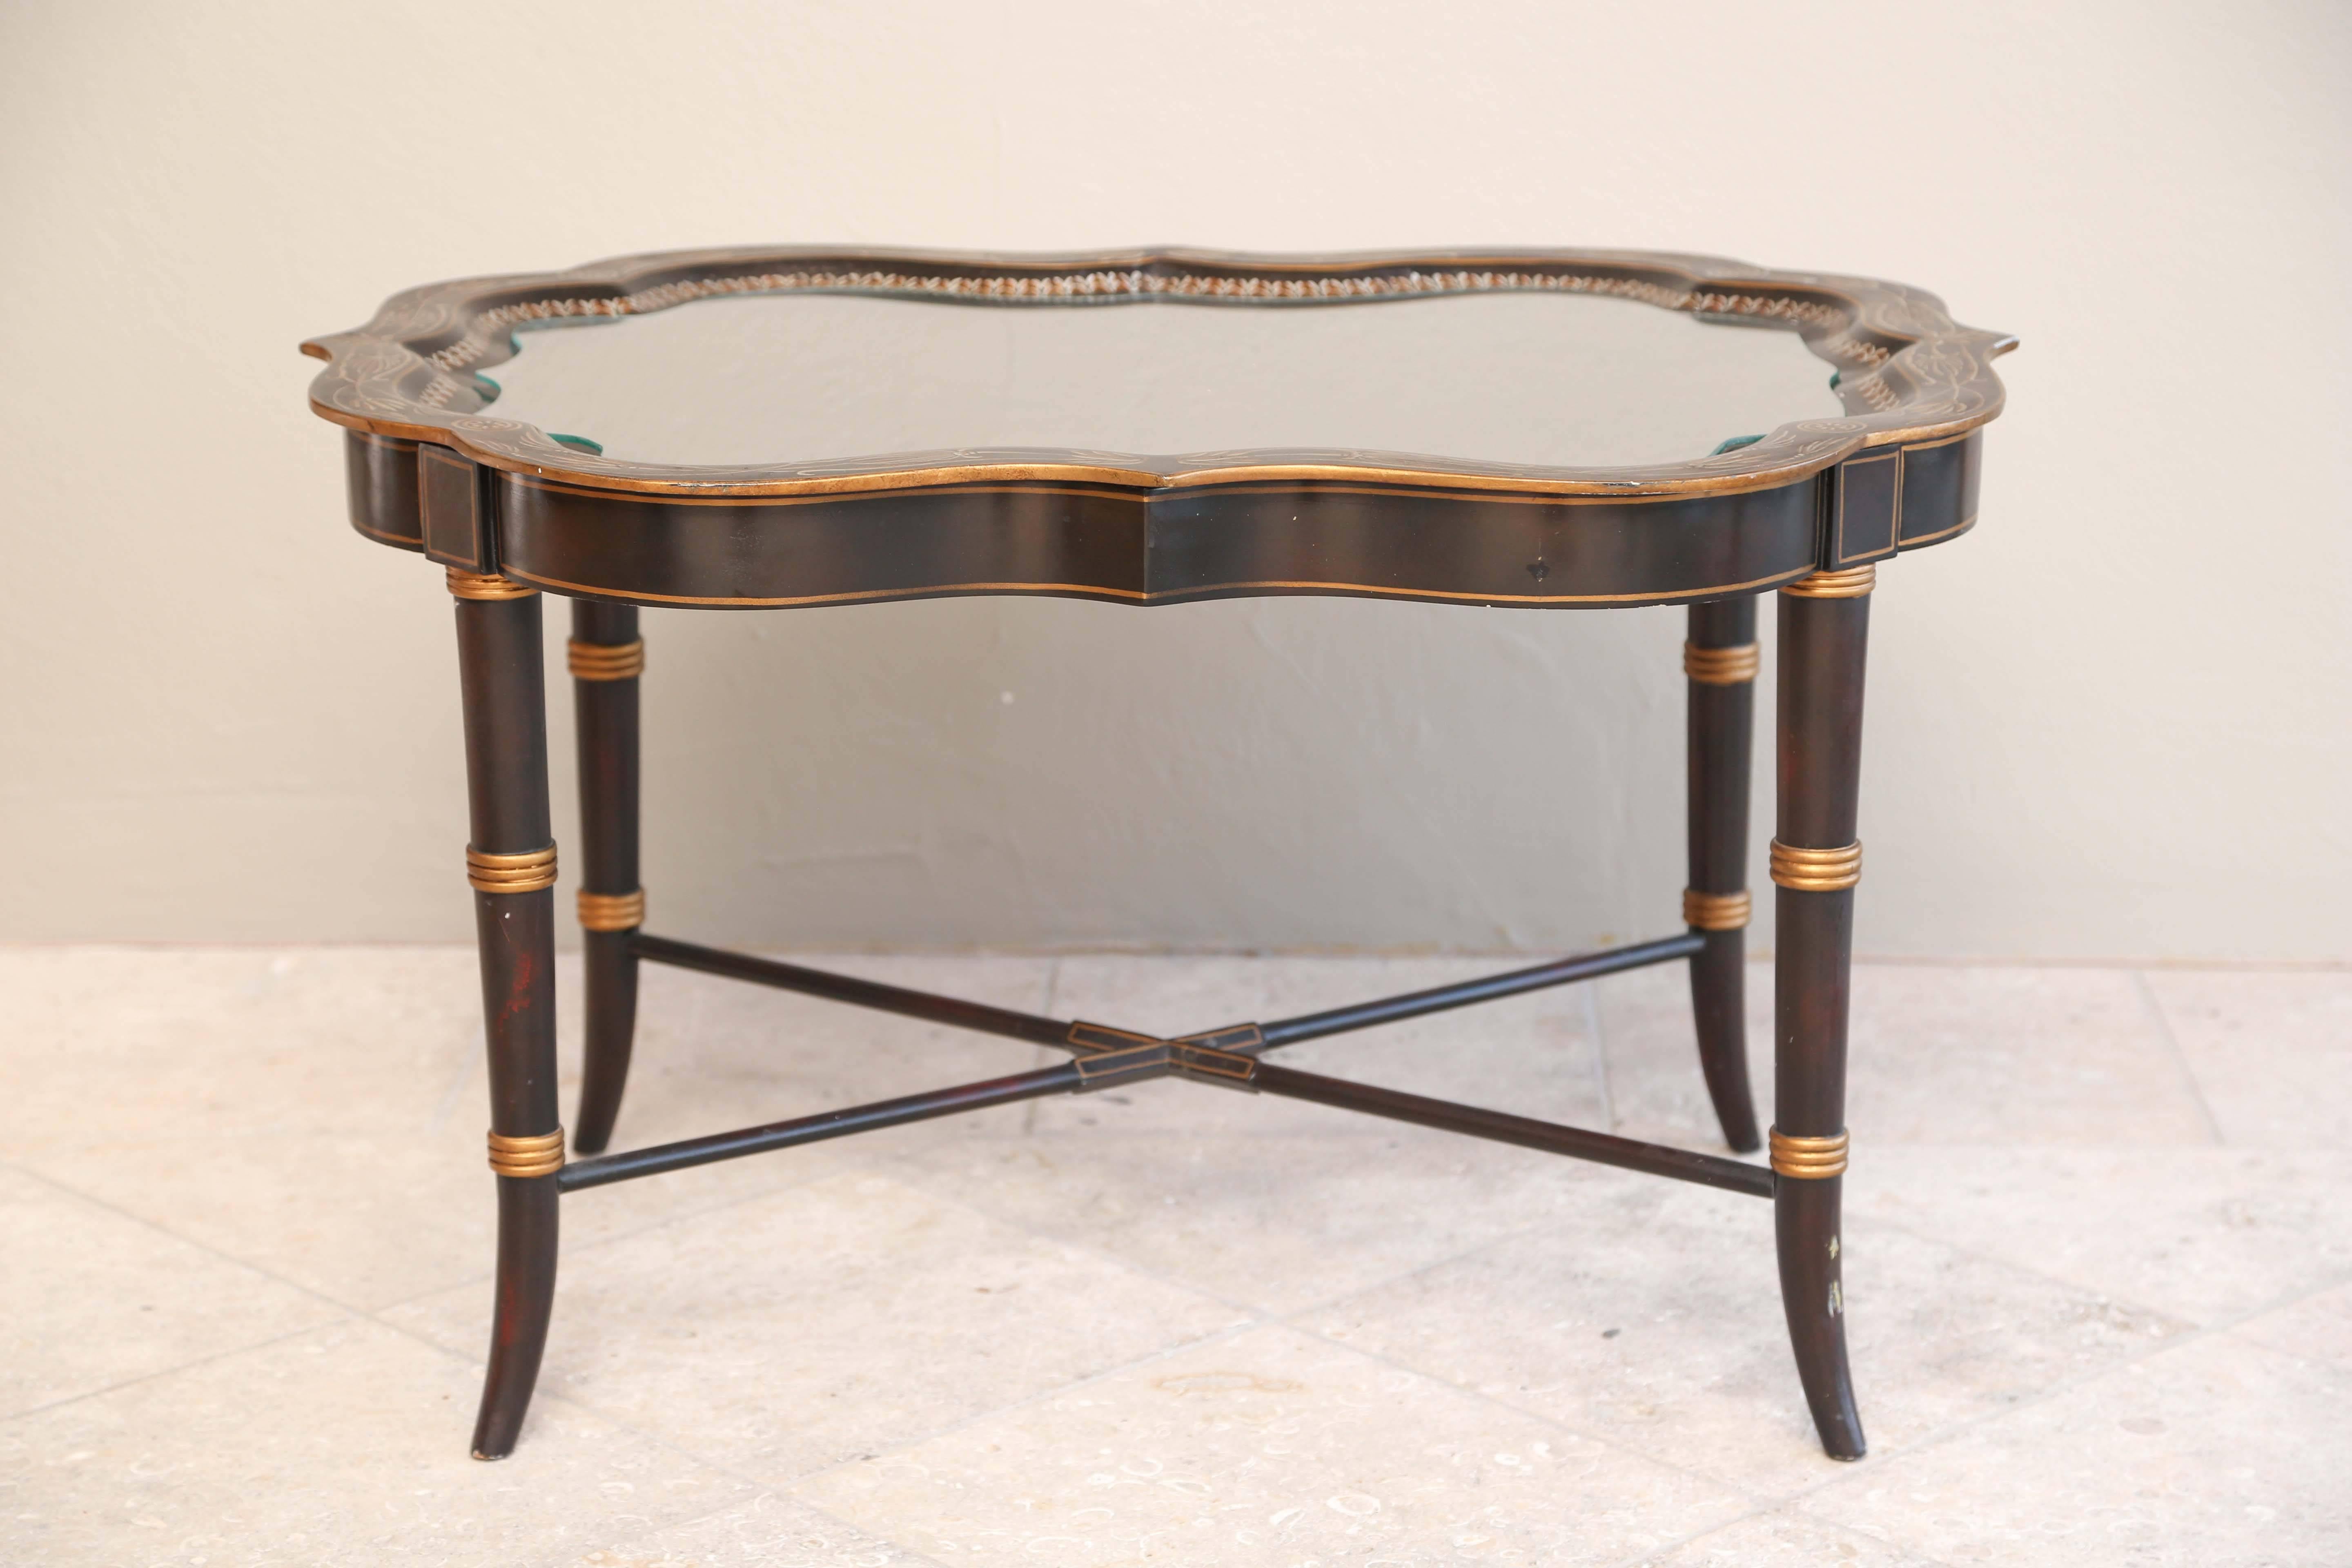 A lovely and well proportioned coffee table with delicate turned legs, hand-painted gold leaf decoration and cross stretchers. This piece came with a custom cut-glass topper that fits nicely and will be included. We will list this as one piece but